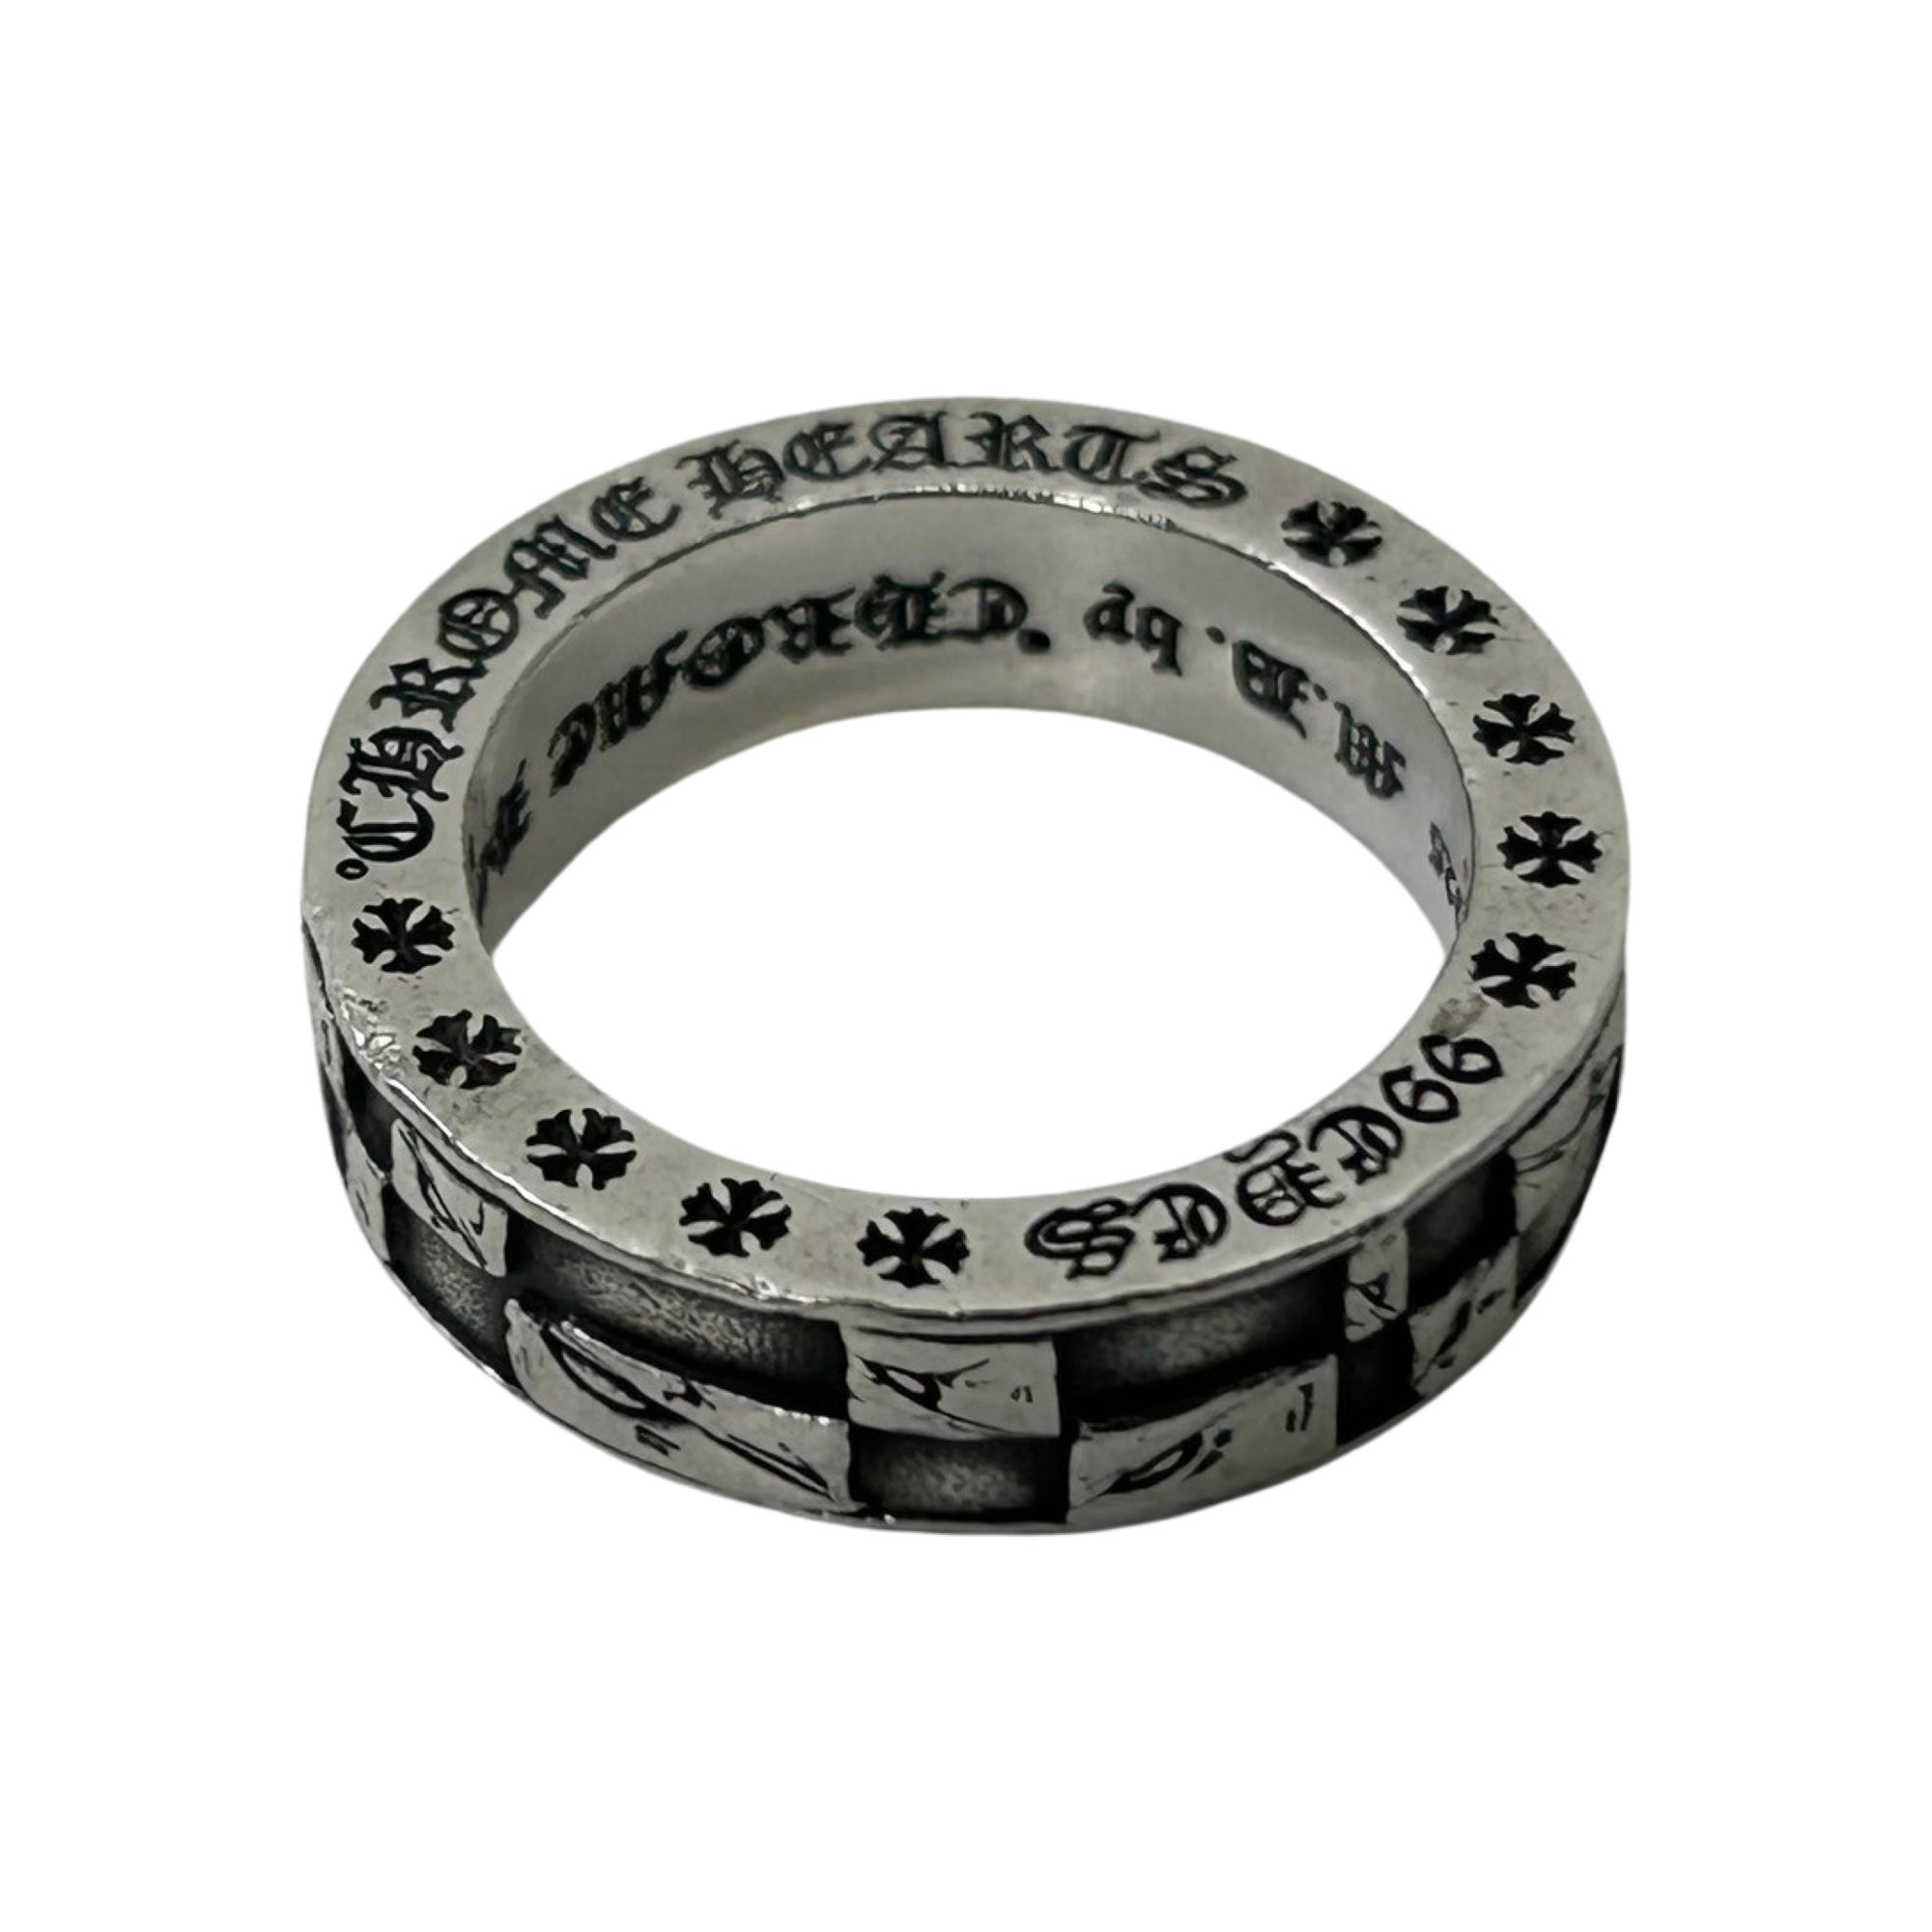 CHROME HEARTS MB 99 EYES 6MM SPACER